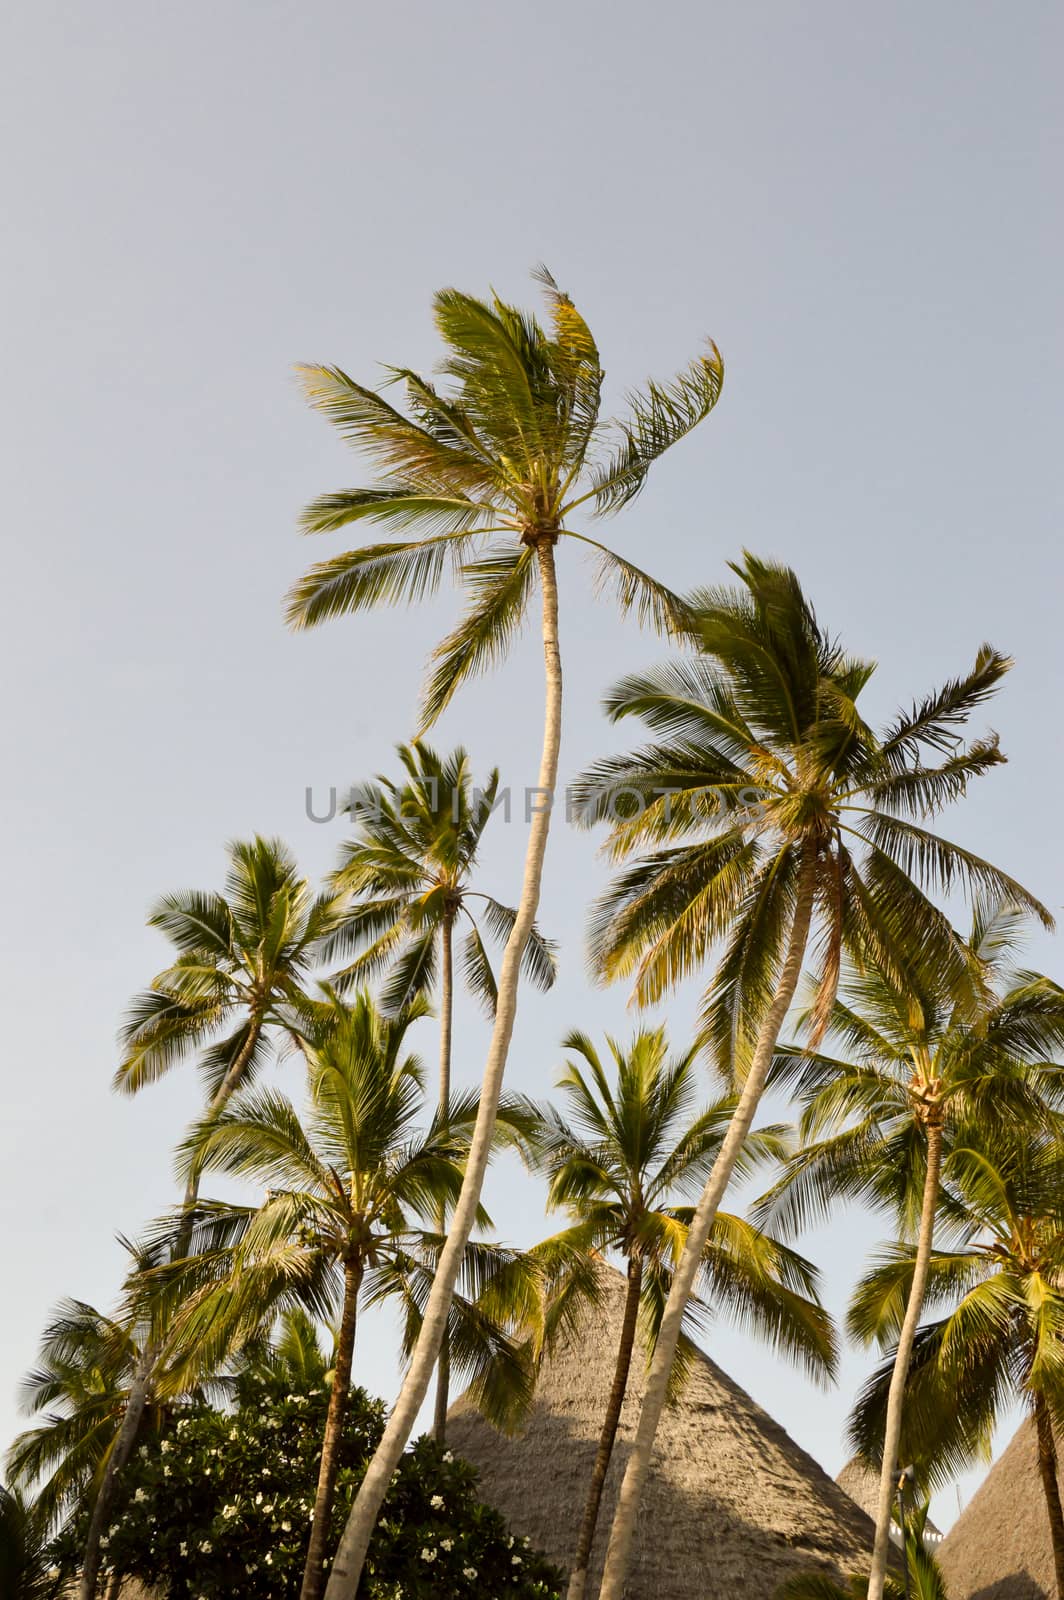 Palm tree with a thatched roof on the sandy beach of Bamburi near Mombasa in Kenya